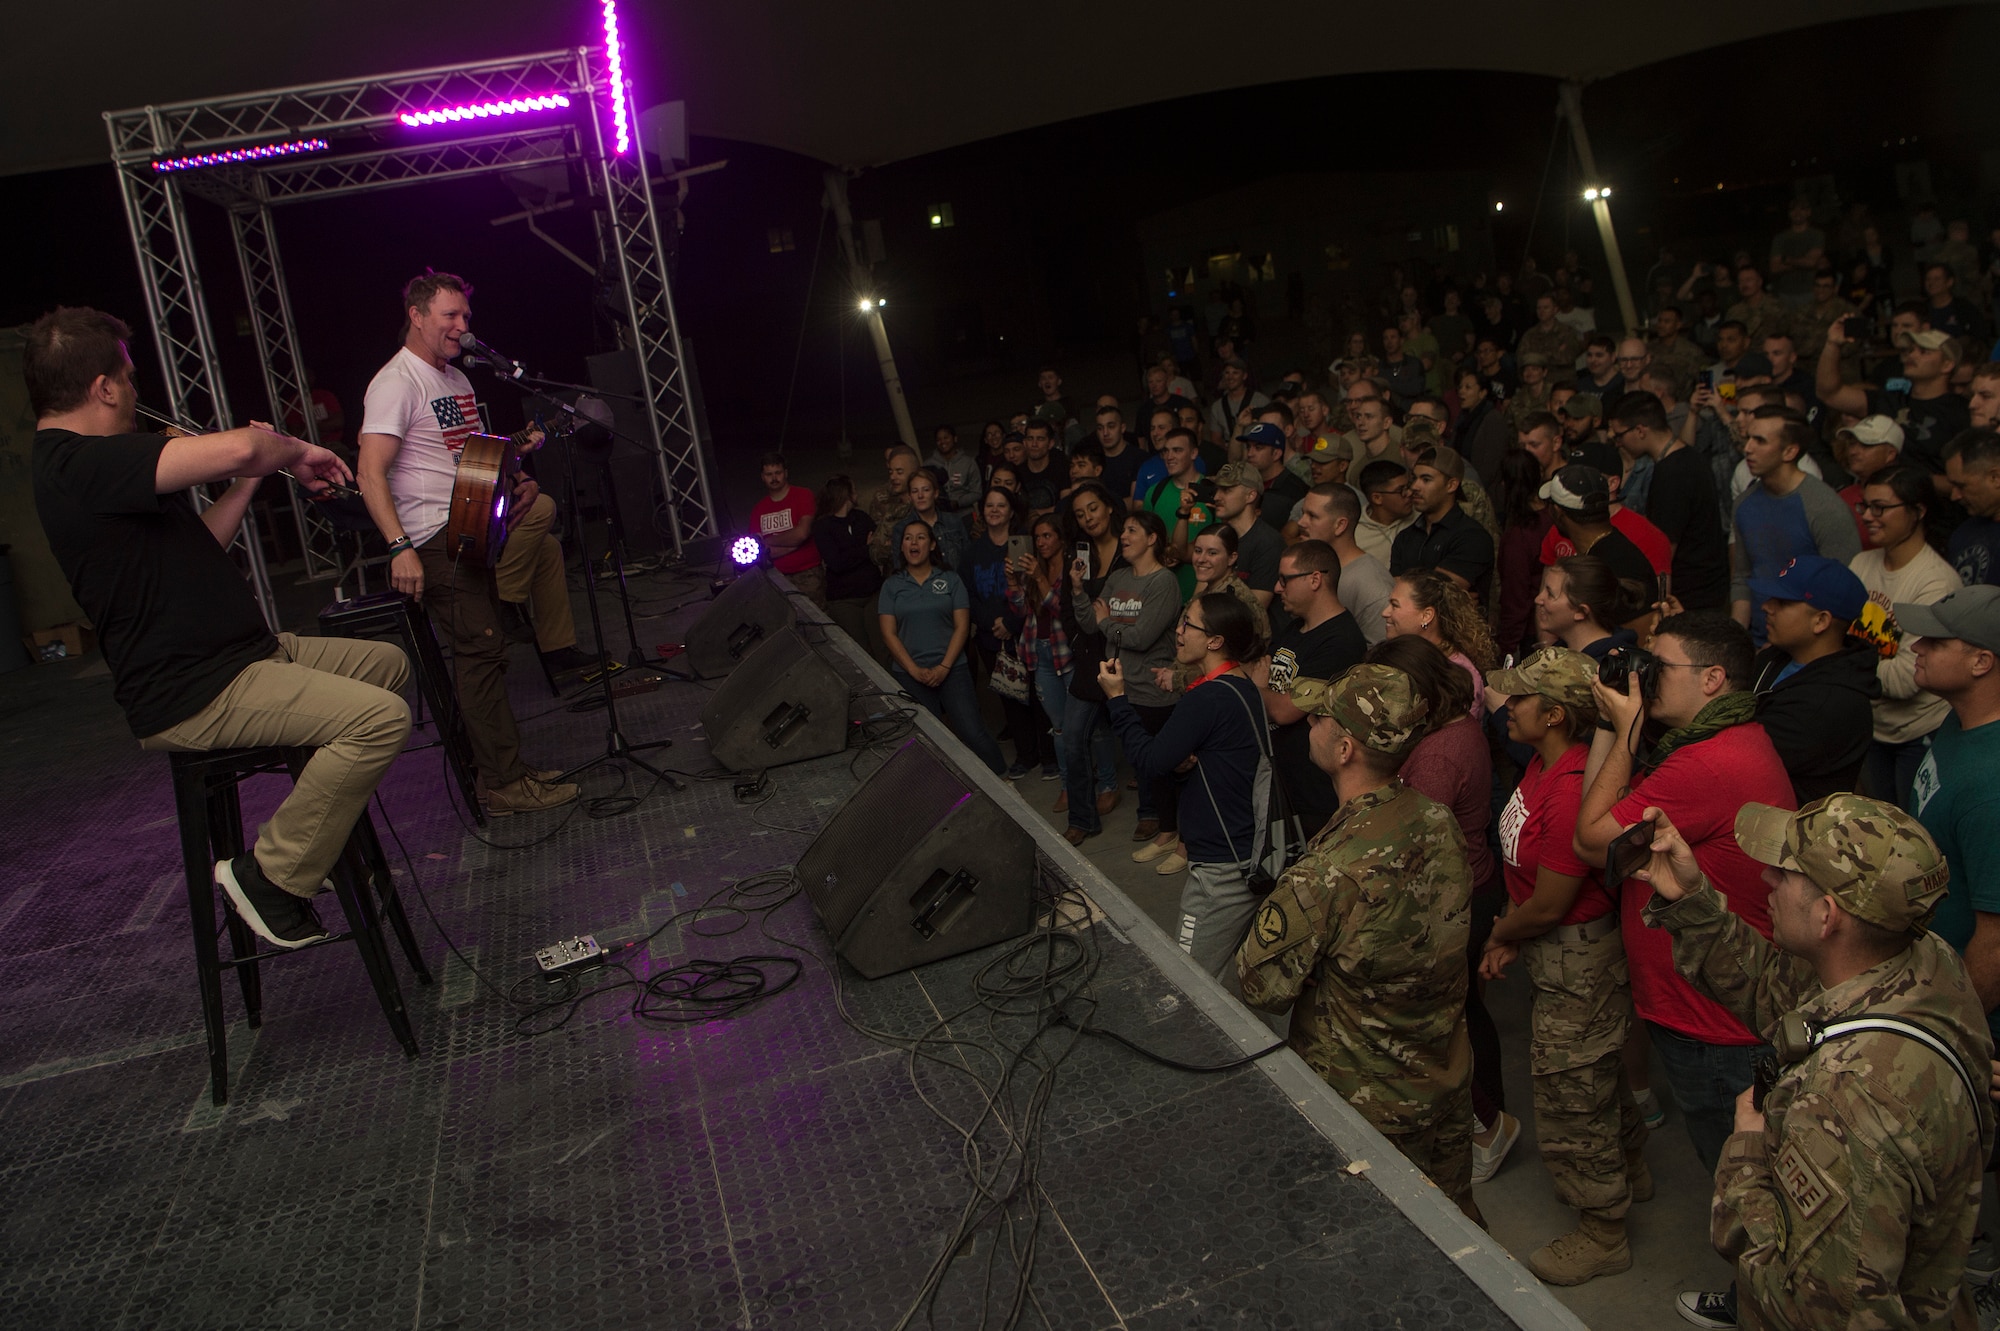 Craig Morgan, country music singer and songwriter, performs for service members during the United Service Organizations (USO) tour April 1, 2019, at Al Udeid Air Base, Qatar. Morgan invited service members to perform alongside him on stage during the show.